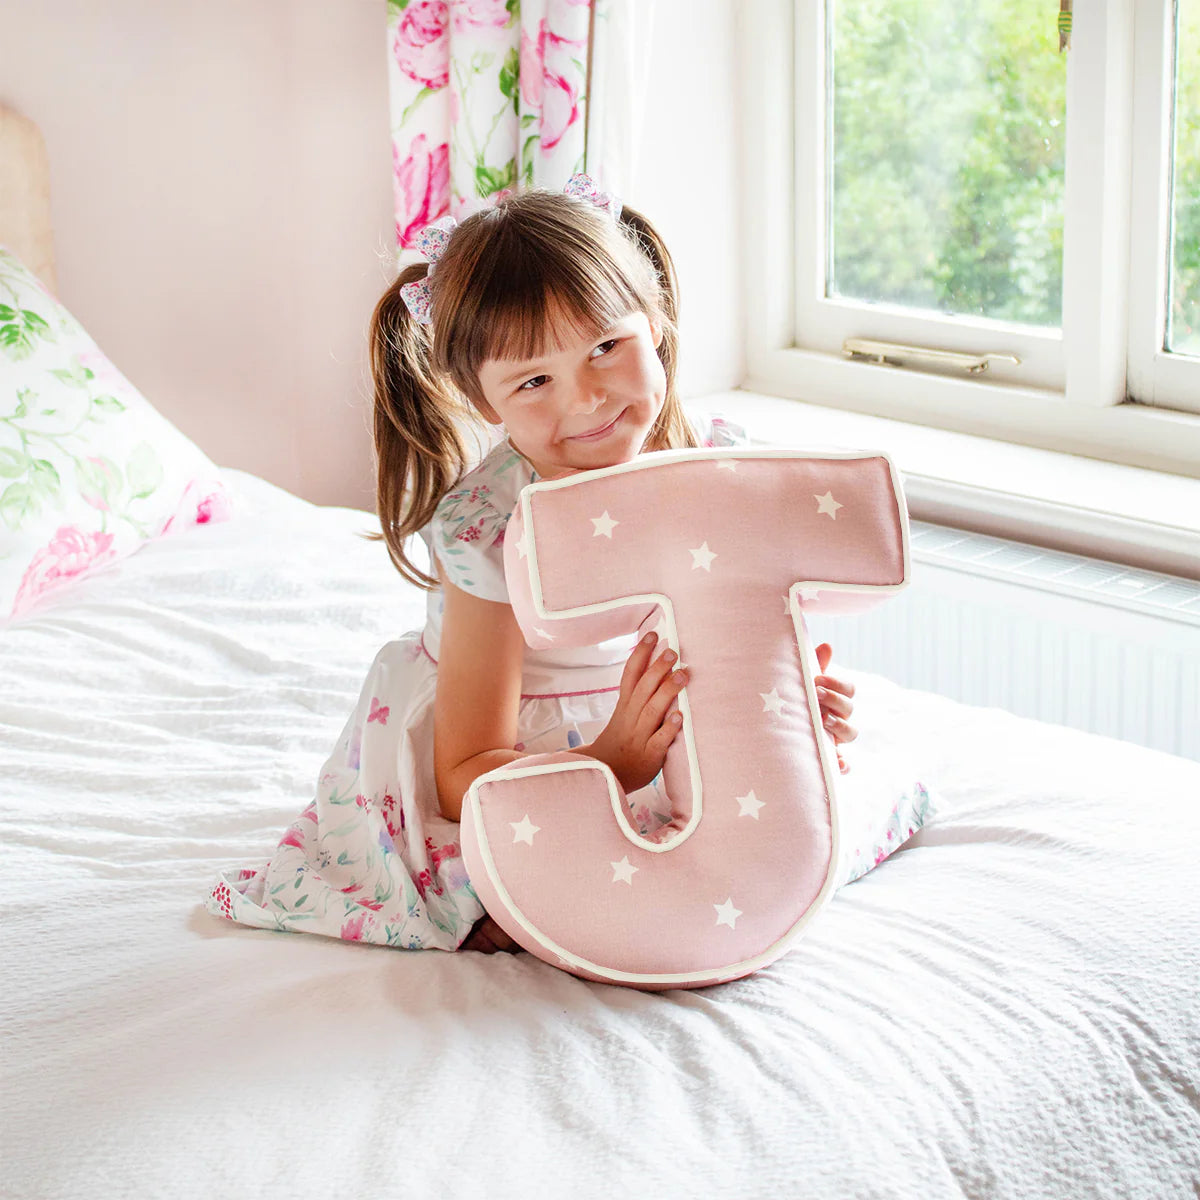 Personalised Letter Cushion 'C' in Soft Pink